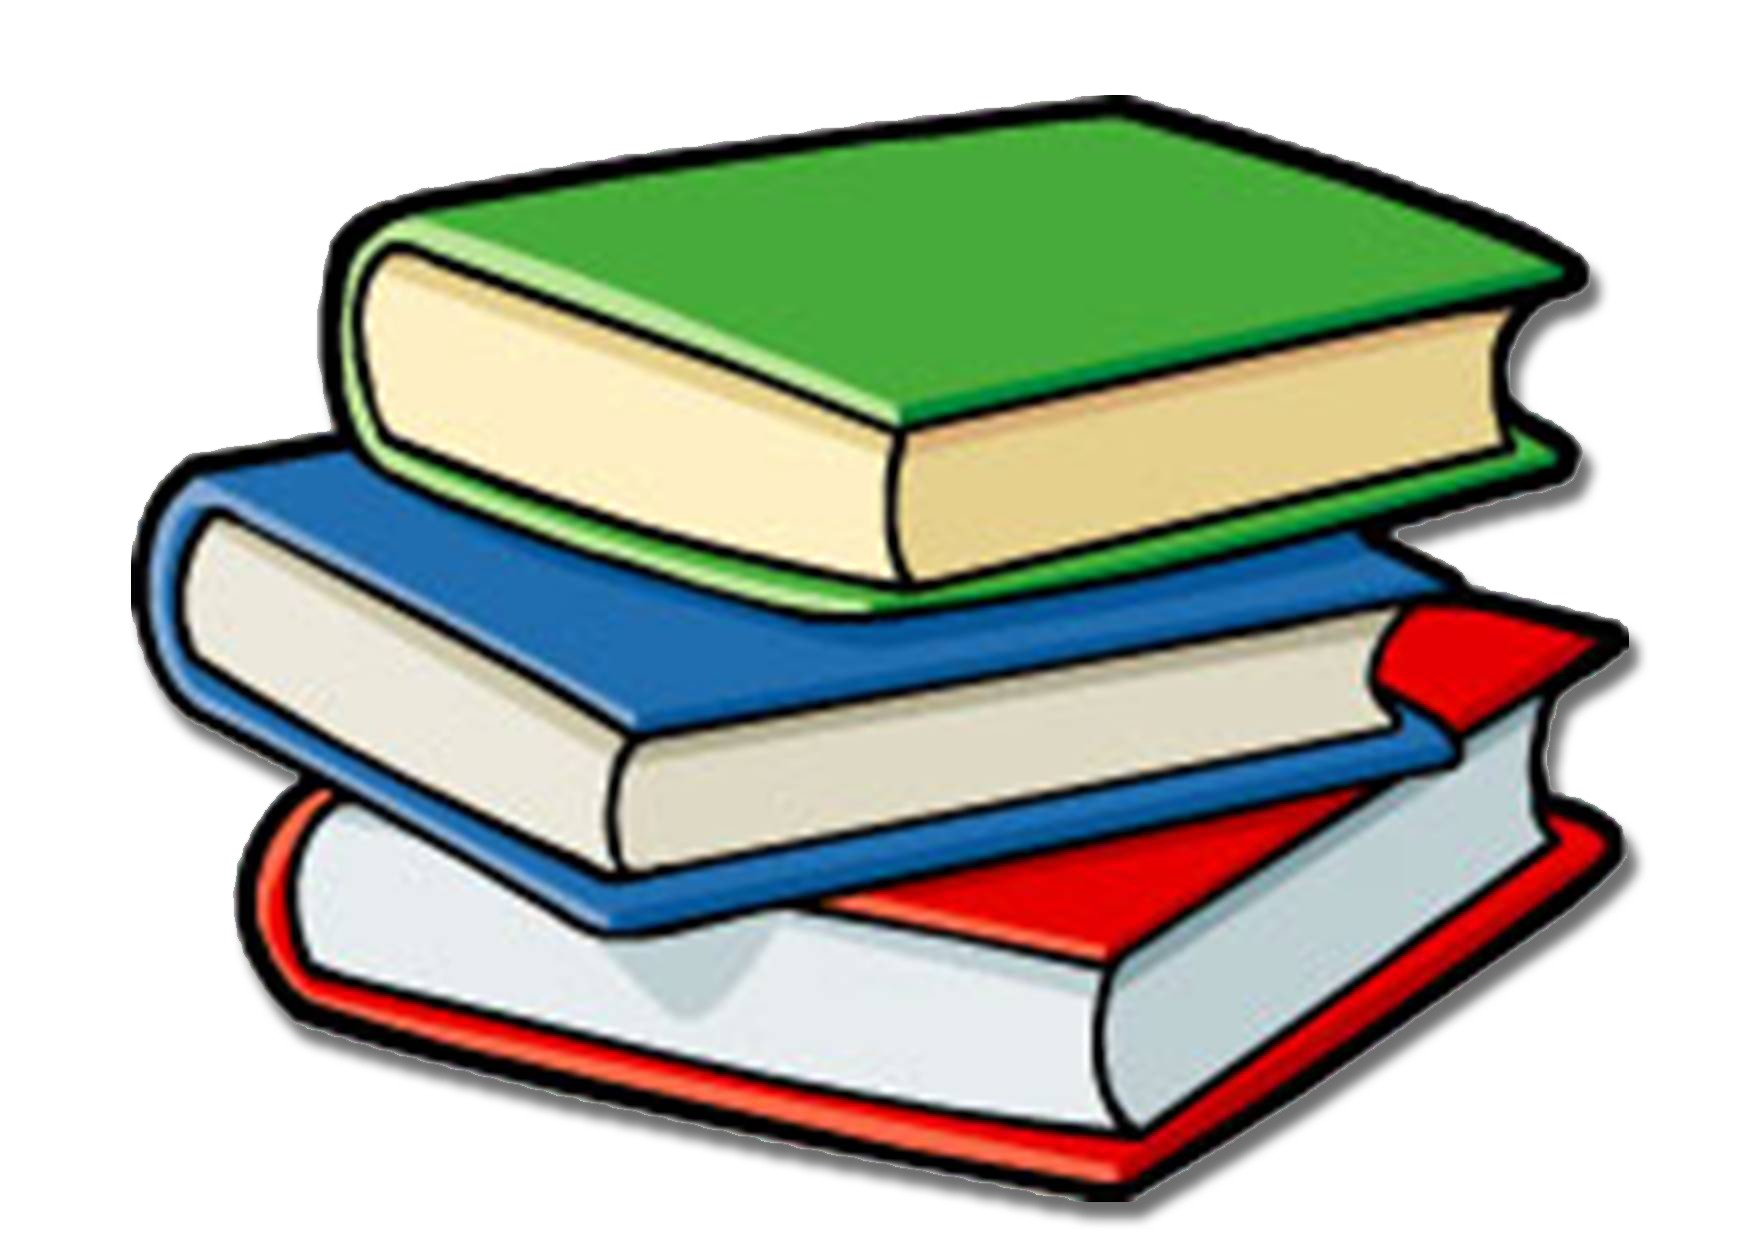 Book, Dictionary and Novel Class in Java